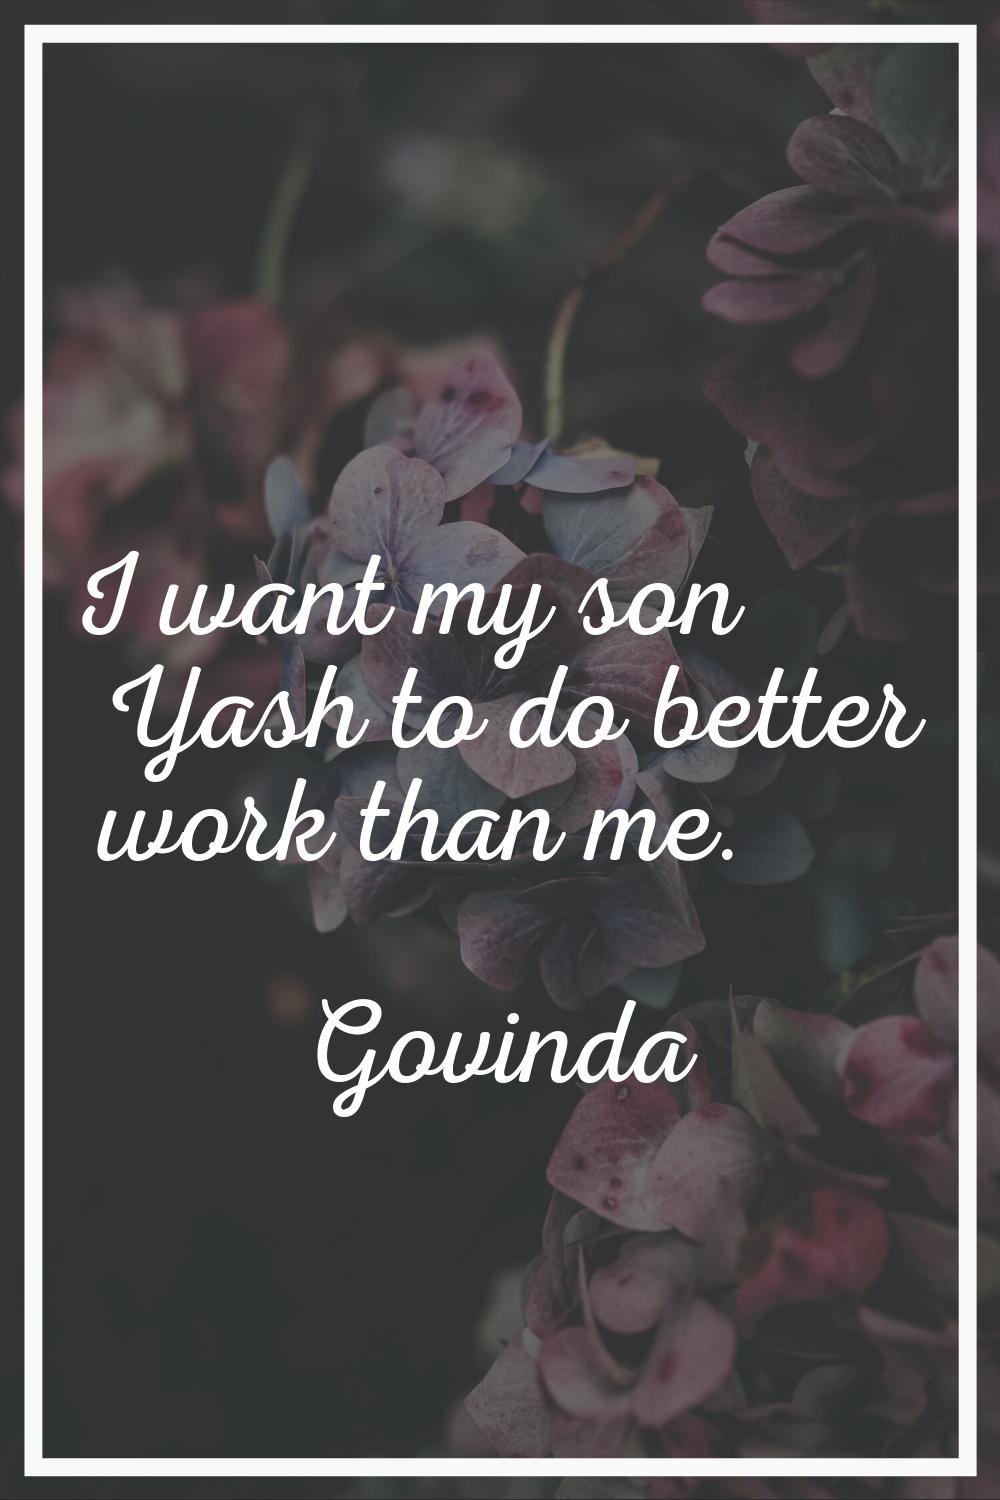 I want my son Yash to do better work than me.